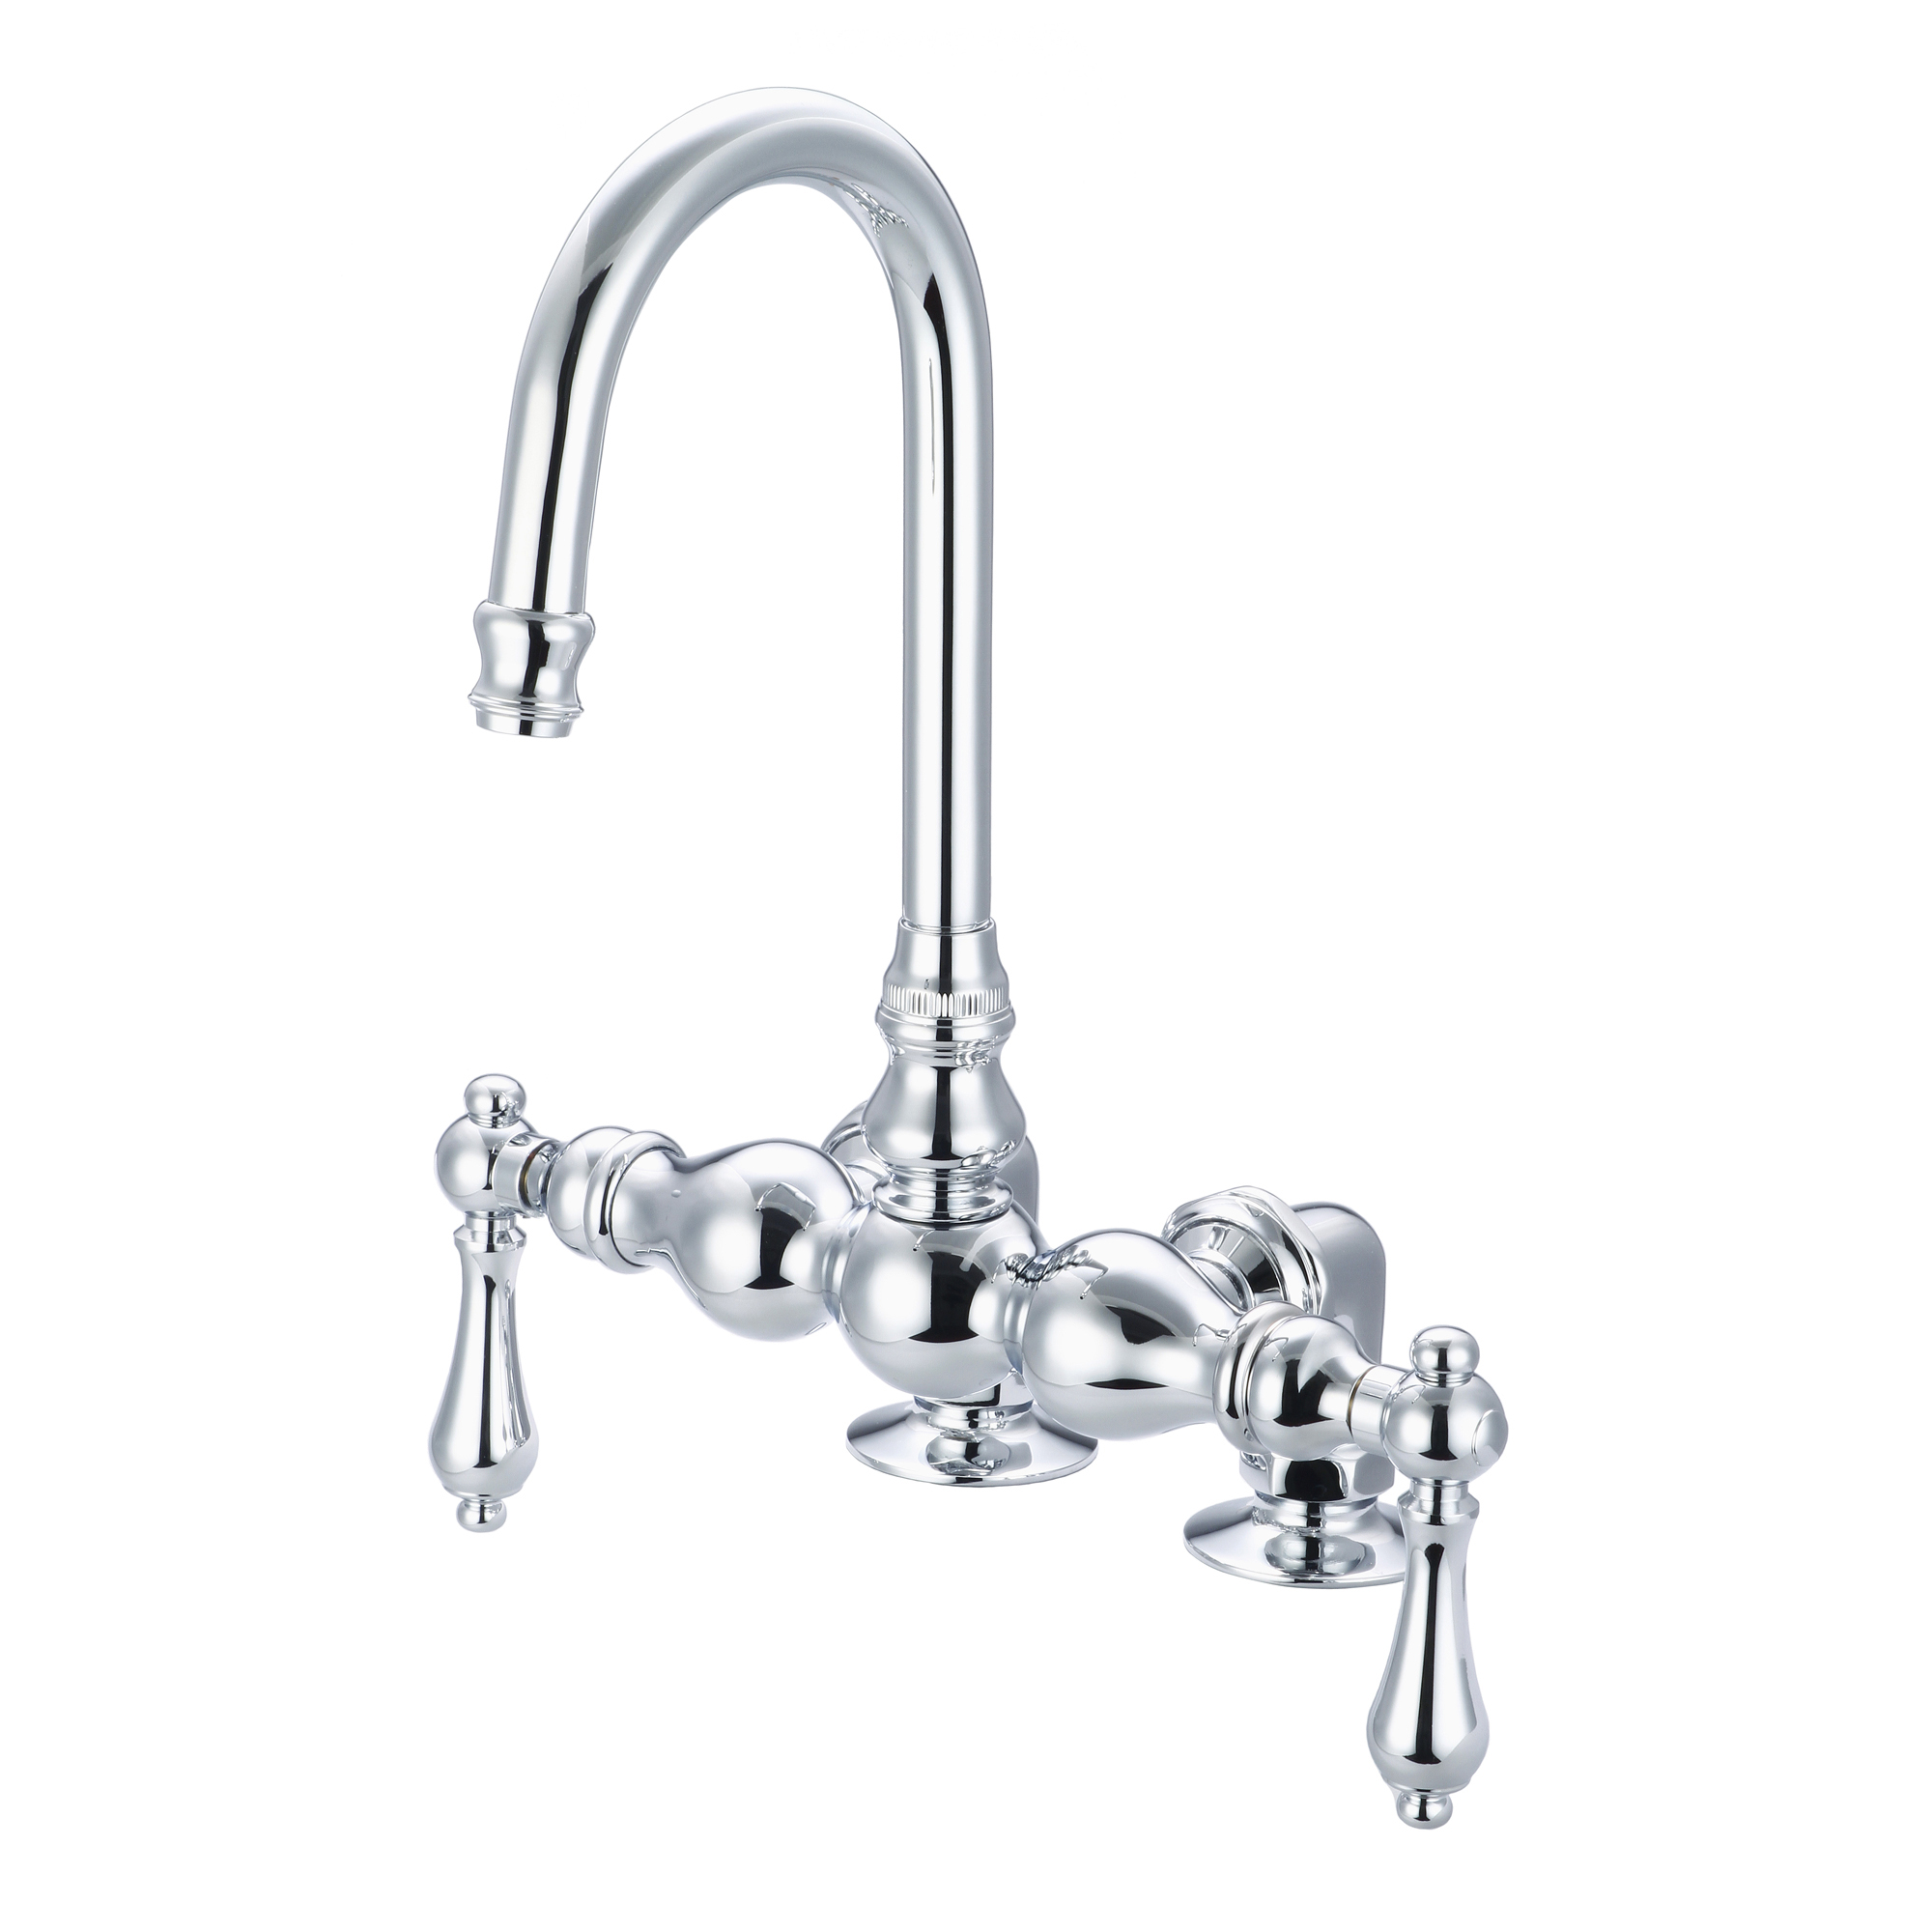 Vintage Classic 3.375 Inch Center Deck Mount Tub Faucet With Gooseneck Spout & 2 Inch Risers in Chrome Finish With Metal Lever Handles Without Labels